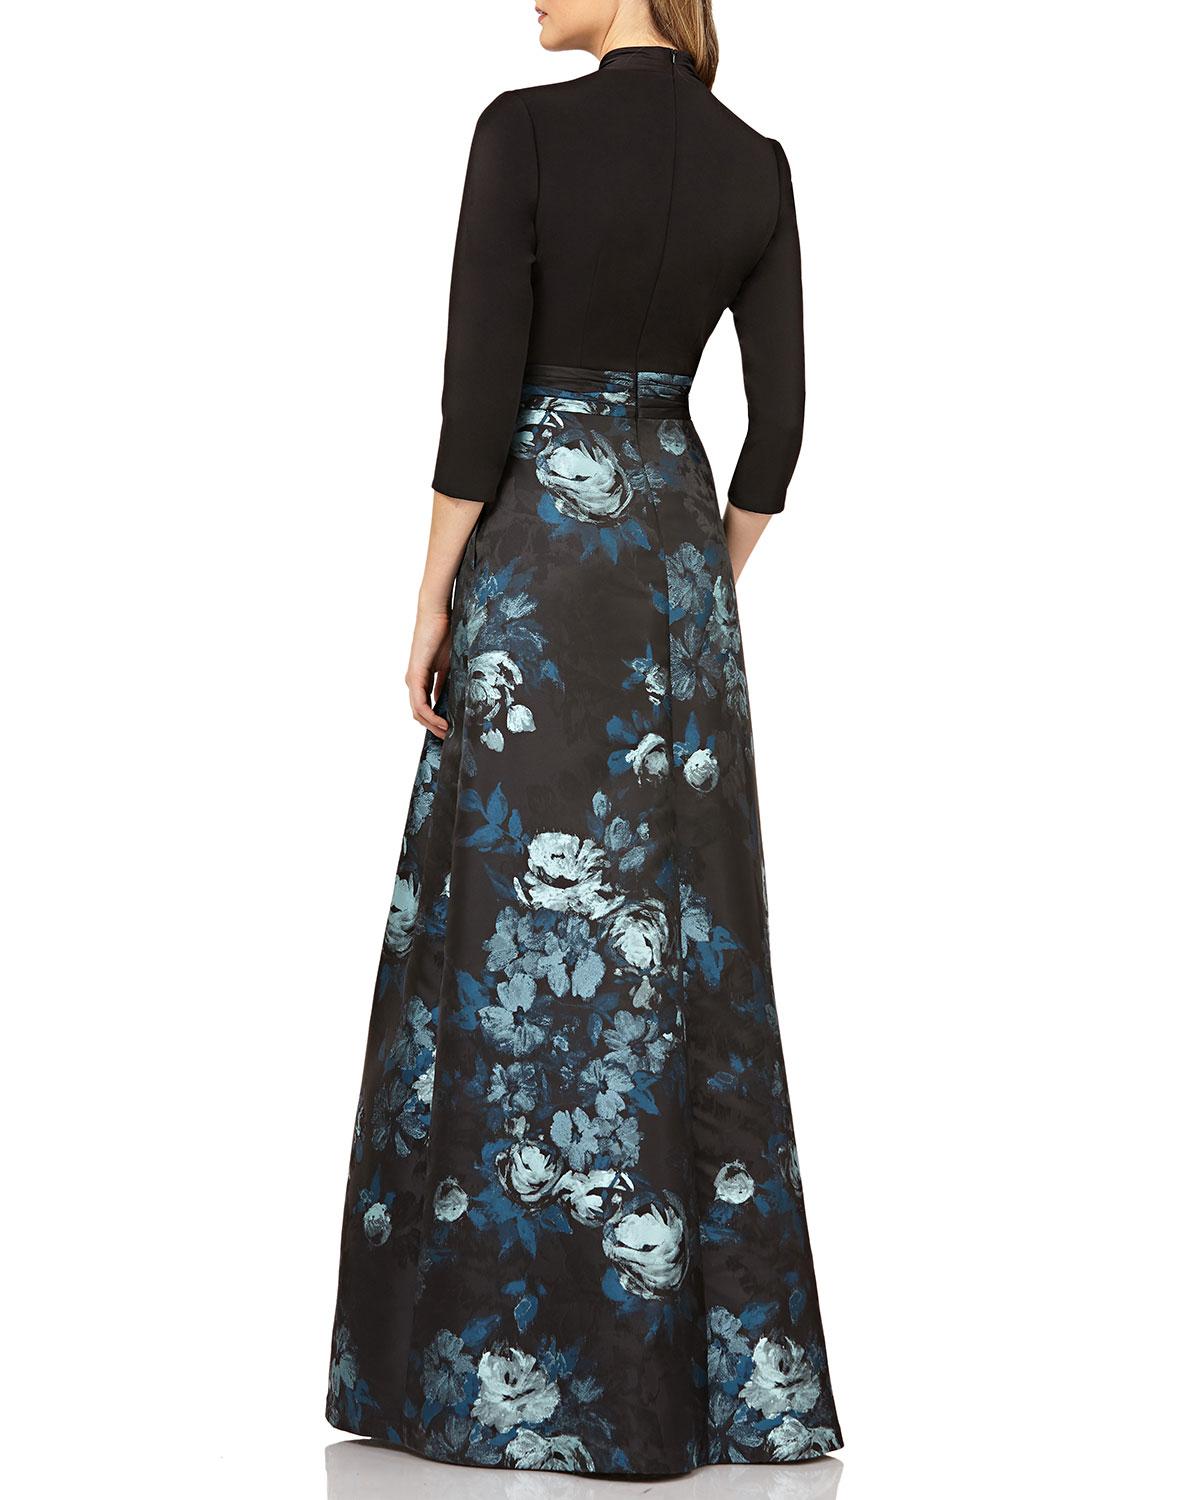 Kay Unger Synthetic Crepe Jumpsuit W/ Floral Skirt Overlay in Black - Lyst